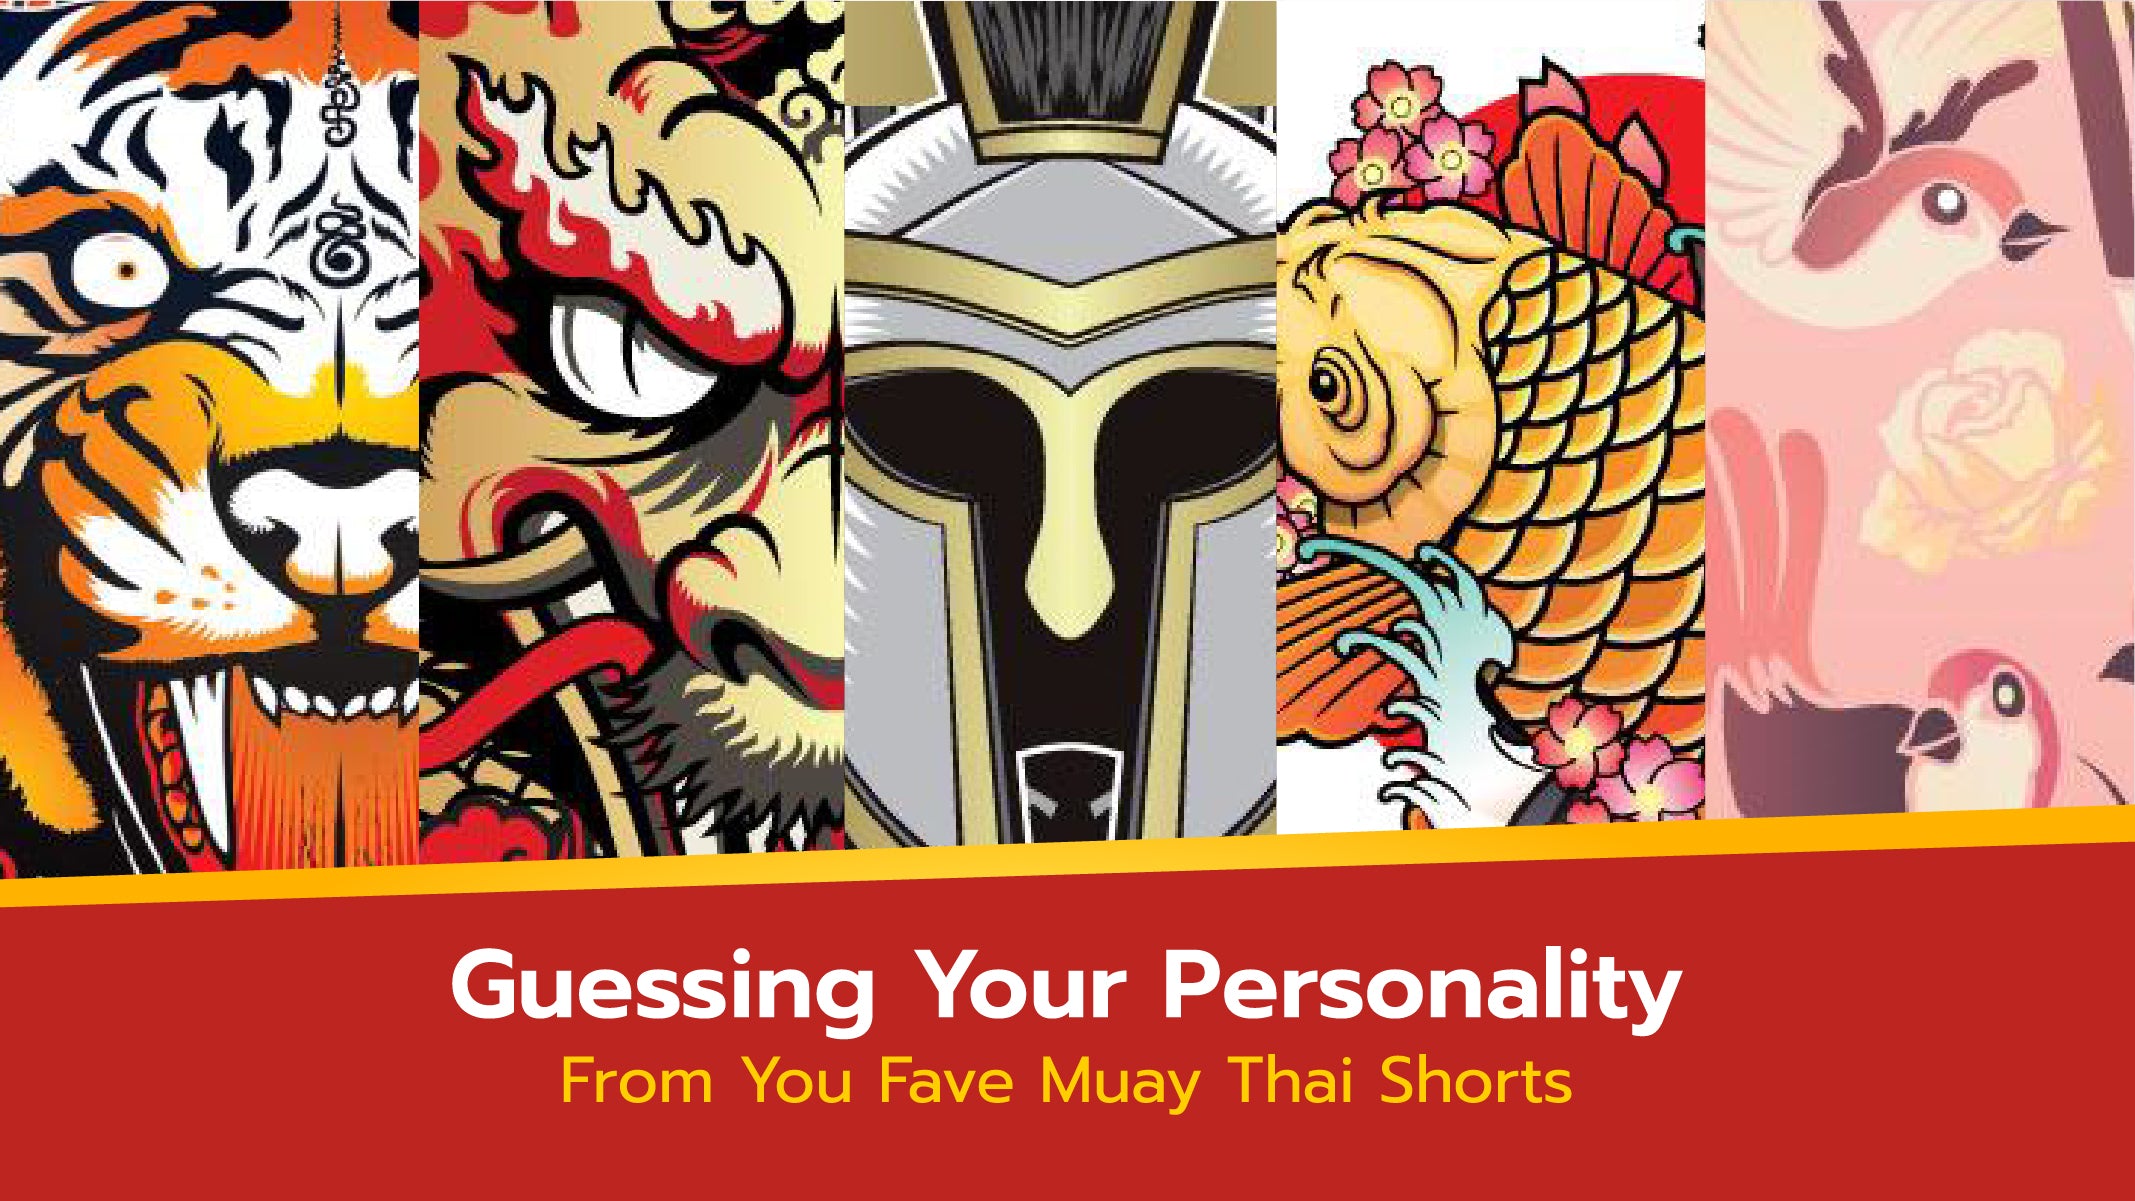 Guessing Your Personality From You Fave Muay Thai Shorts